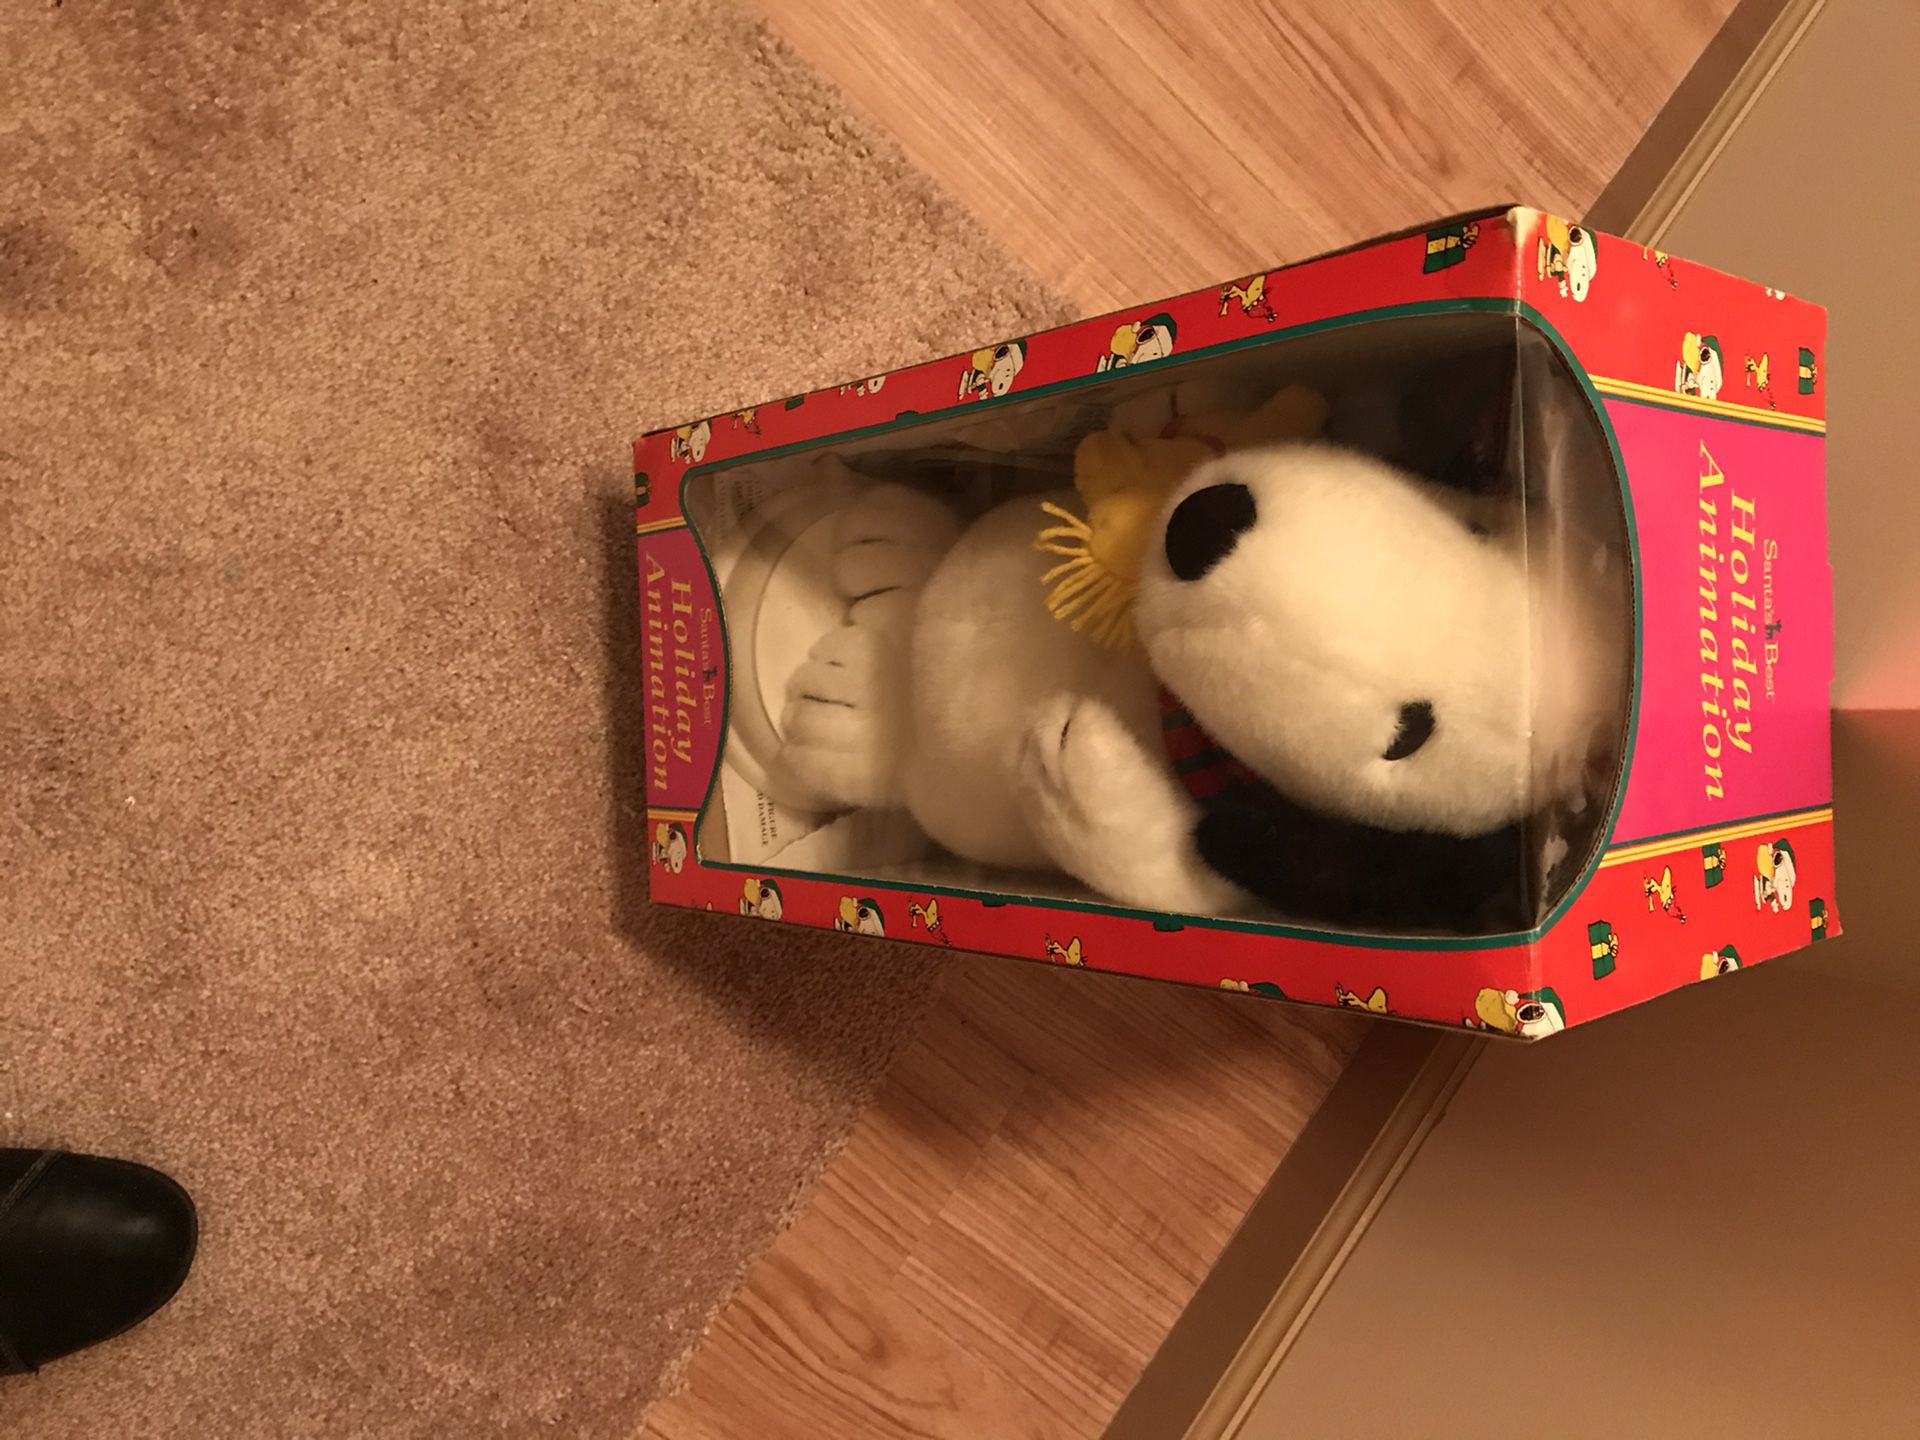 Two snoopy animated dolls